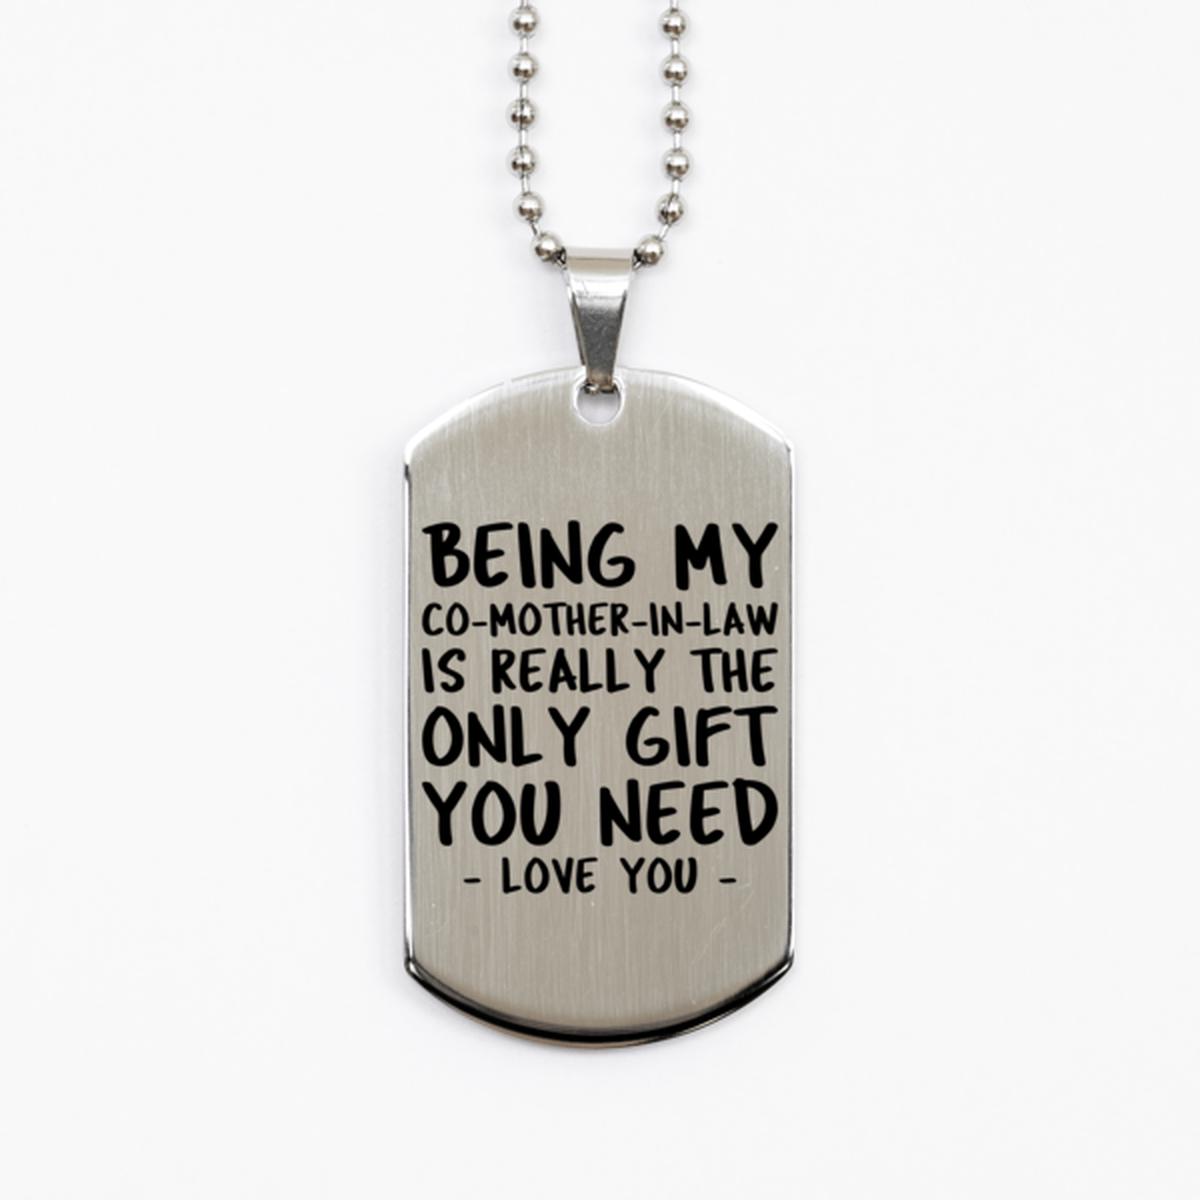 Funny Co-mother-in-law Silver Dog Tag Necklace, Being My Co-mother-in-law Is Really the Only Gift You Need, Best Birthday Gifts for Co-mother-in-law